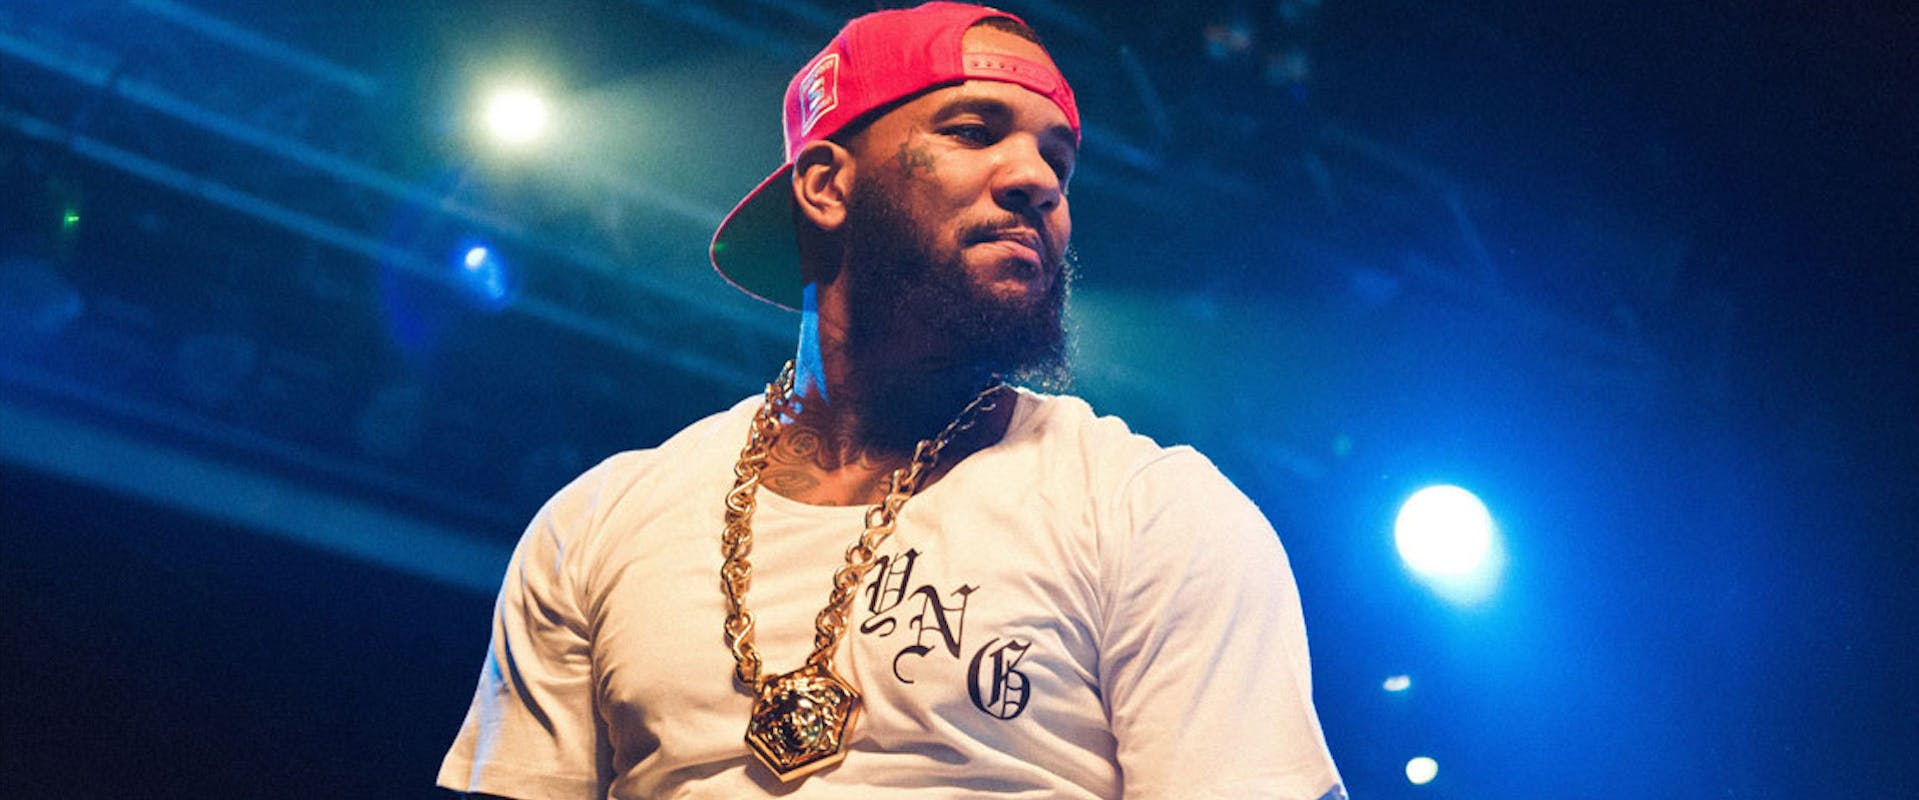 Rapper The Game performs